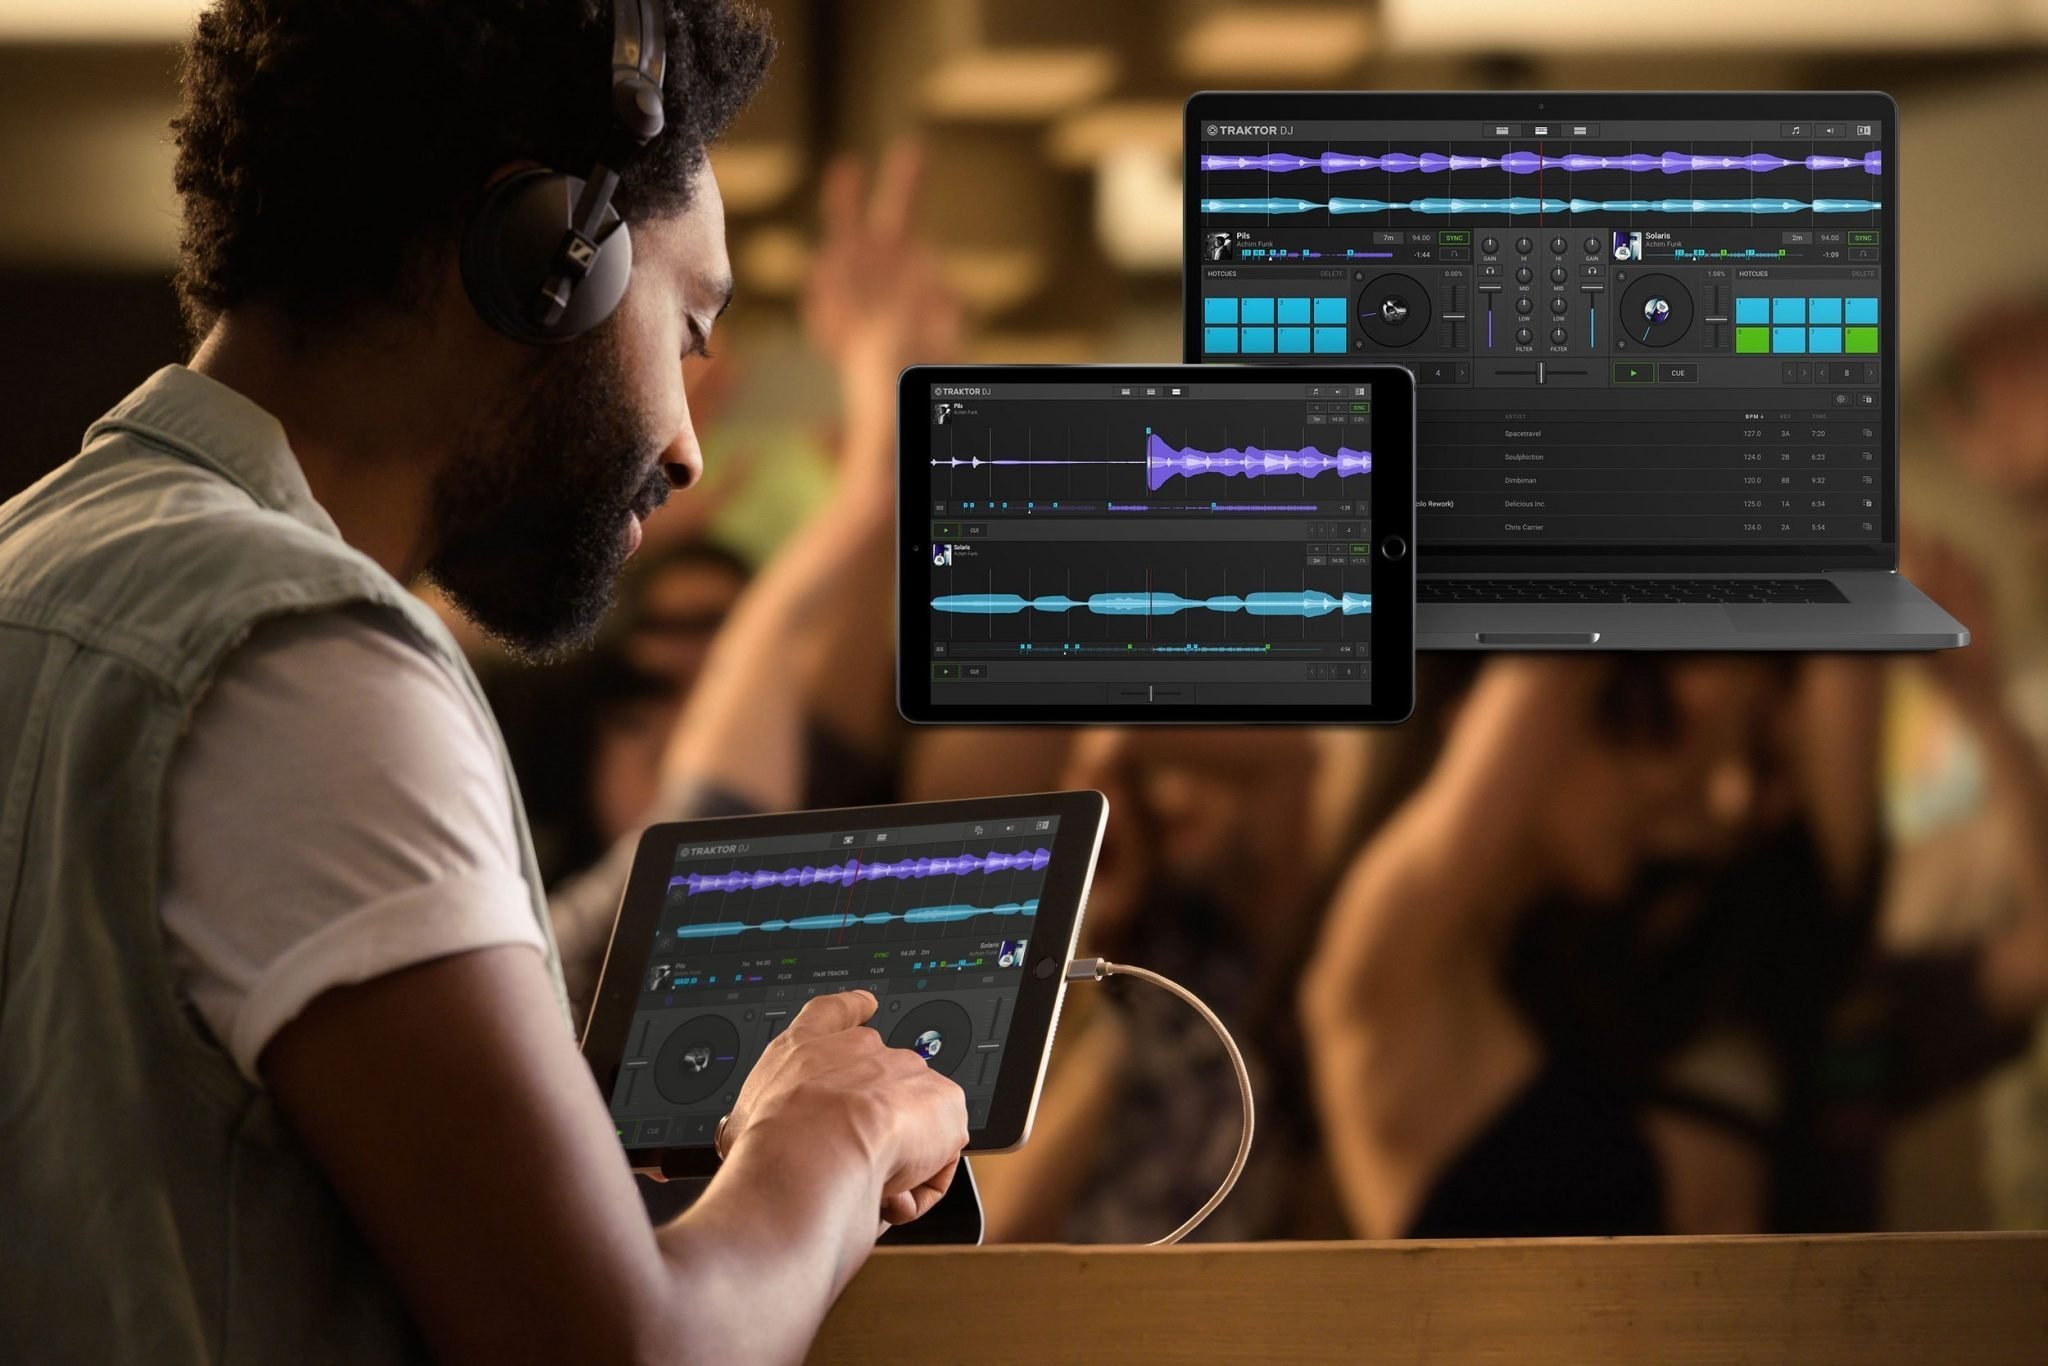 NAMM 2019: So about that new version of Traktor... 6